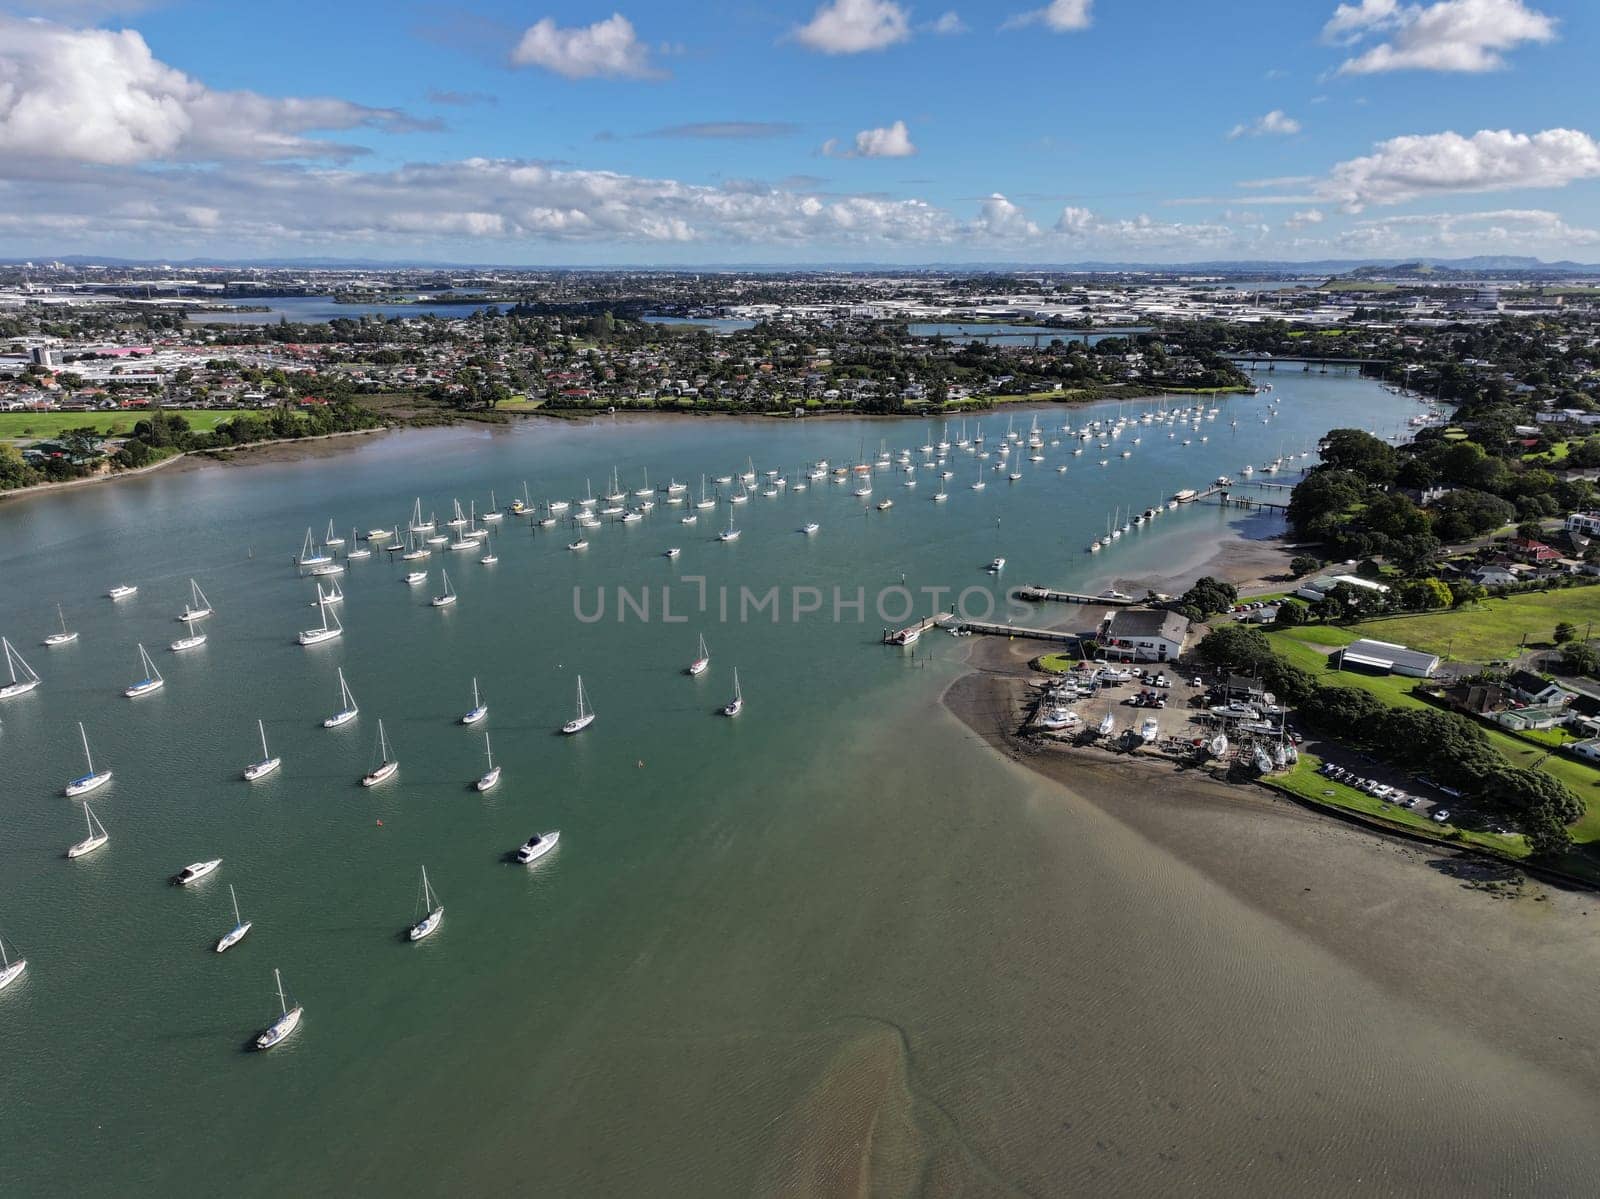 4k drone footage of the Tamaki river at midday, panning across the city scenery. Sailboats on moorings line up the river and marina in New Zealand